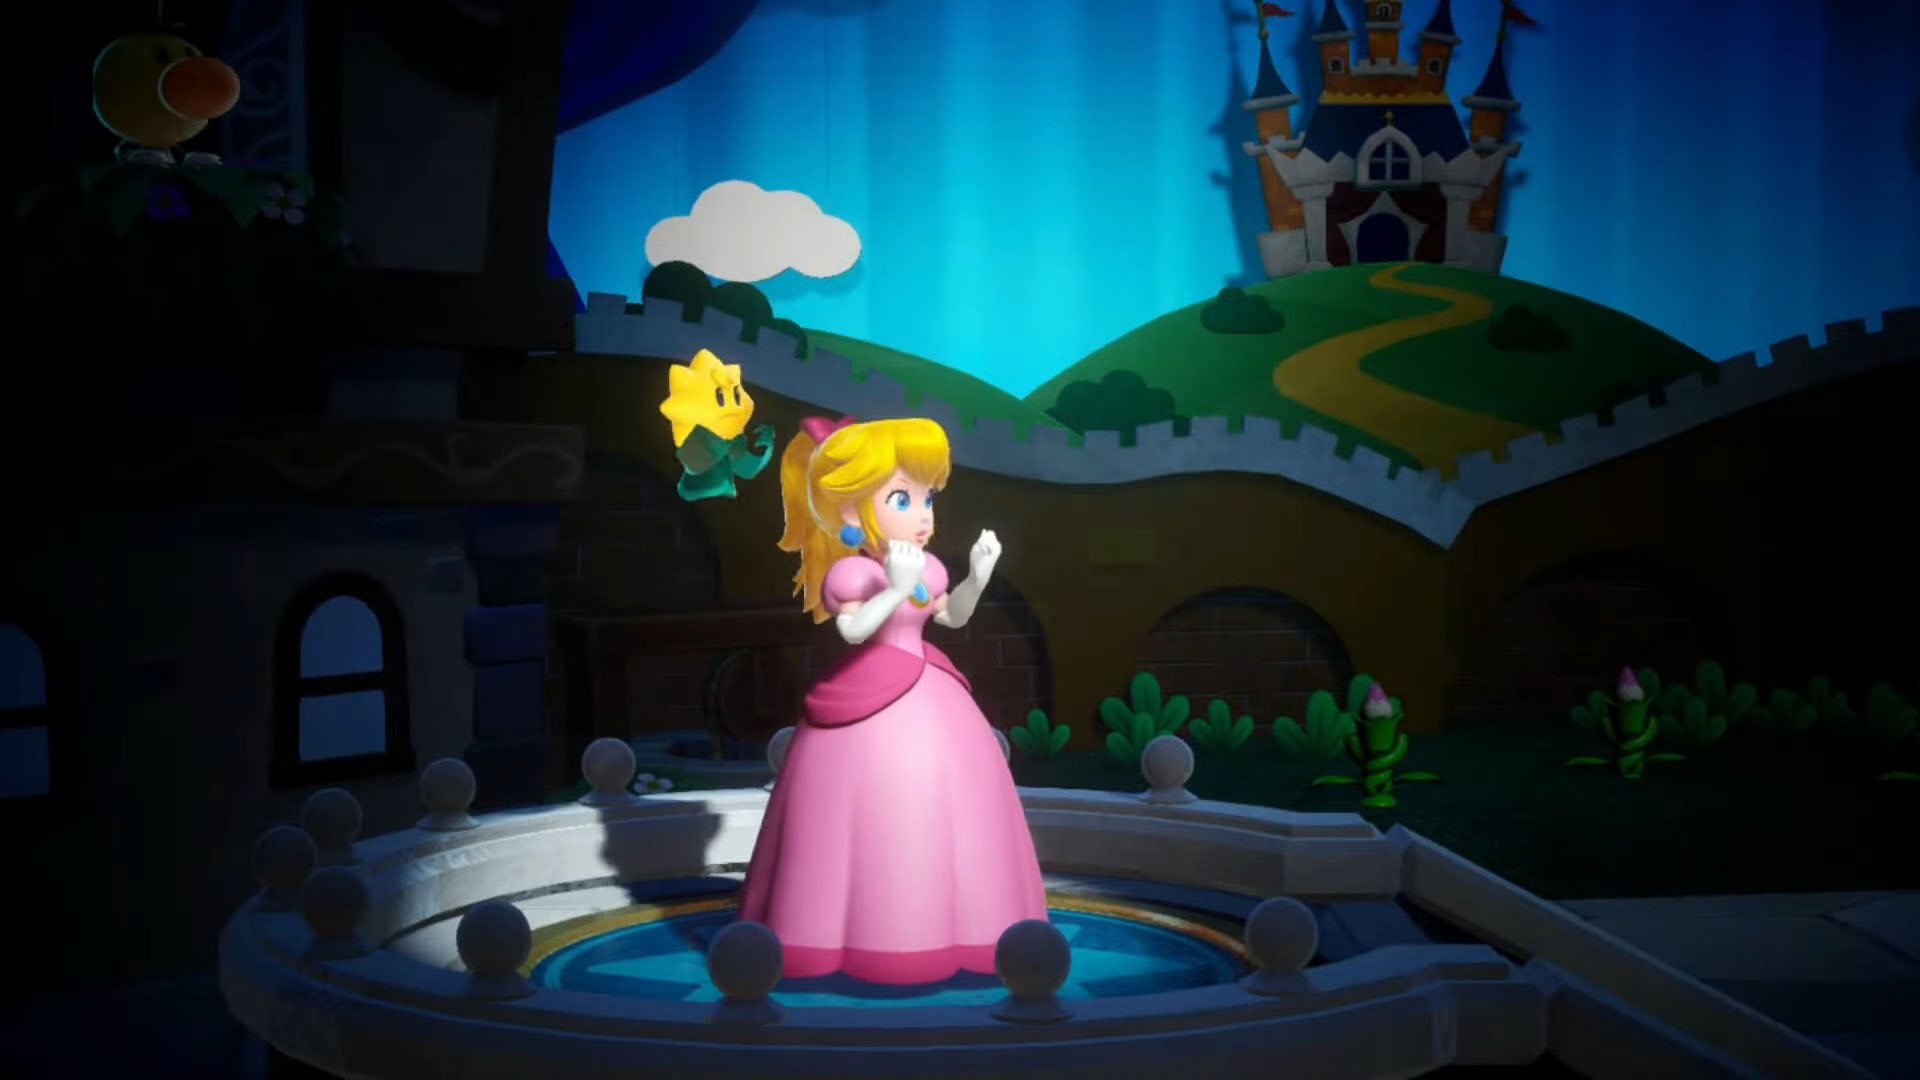 What are your hopes for the new Princess Peach game? : r/Mario